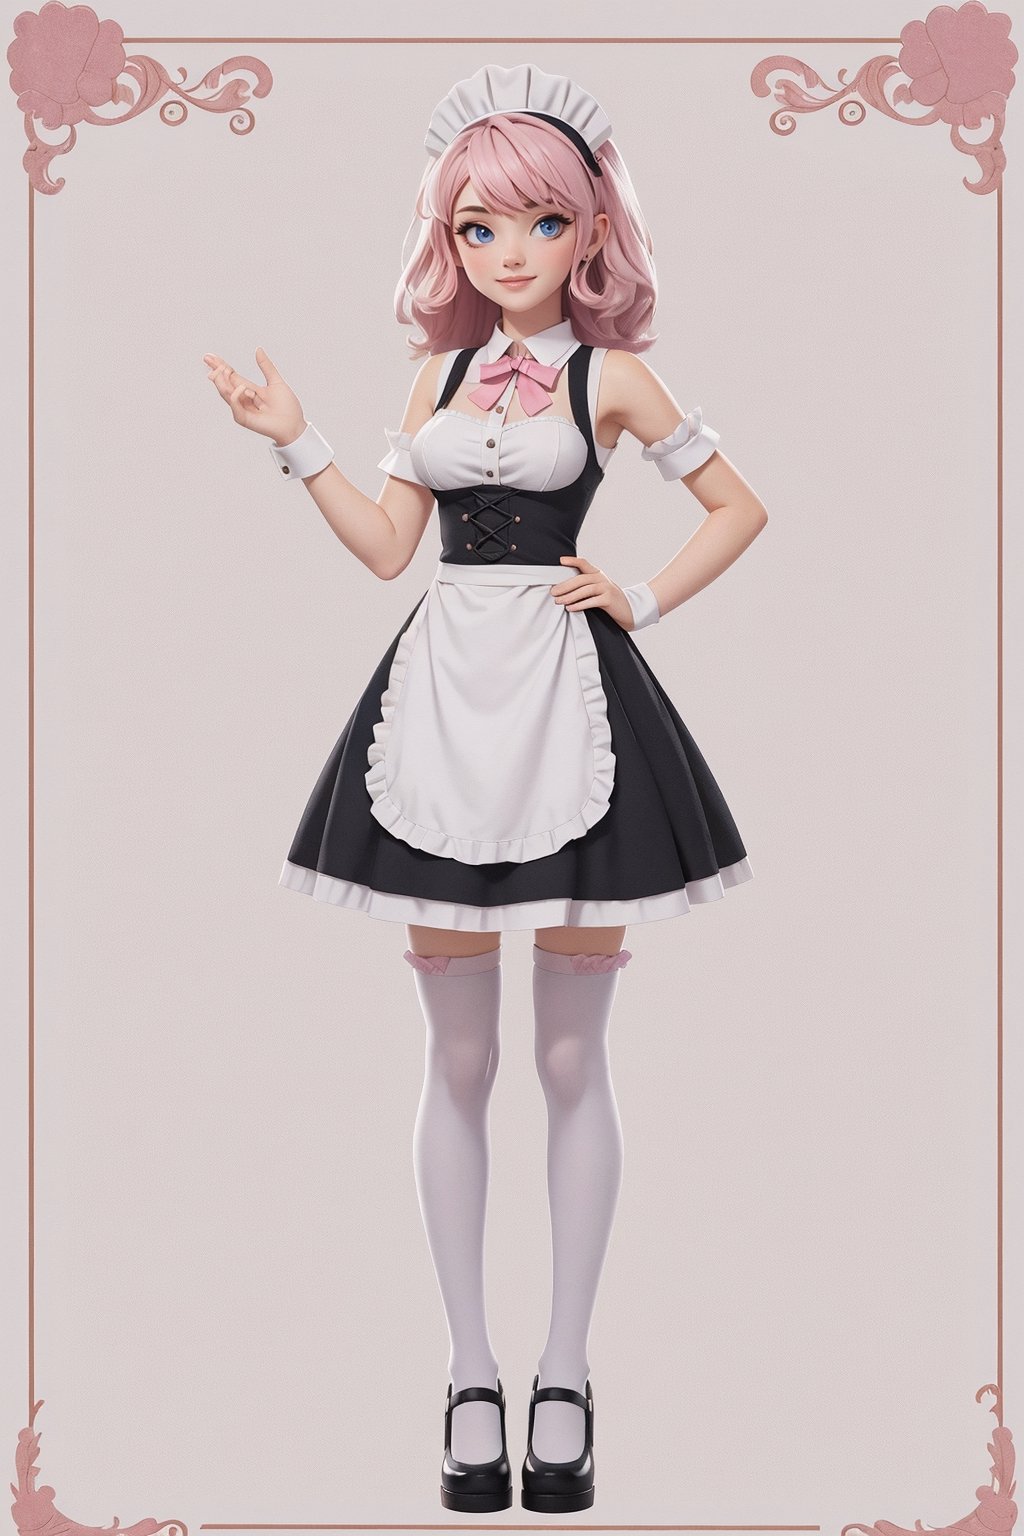 character sheet, student clothes, beautiful, good hands, full body, good body, 18 year old girl body,shoulder length fluffy semi wavy hair, 
pink hair,maid clothes, white stockings